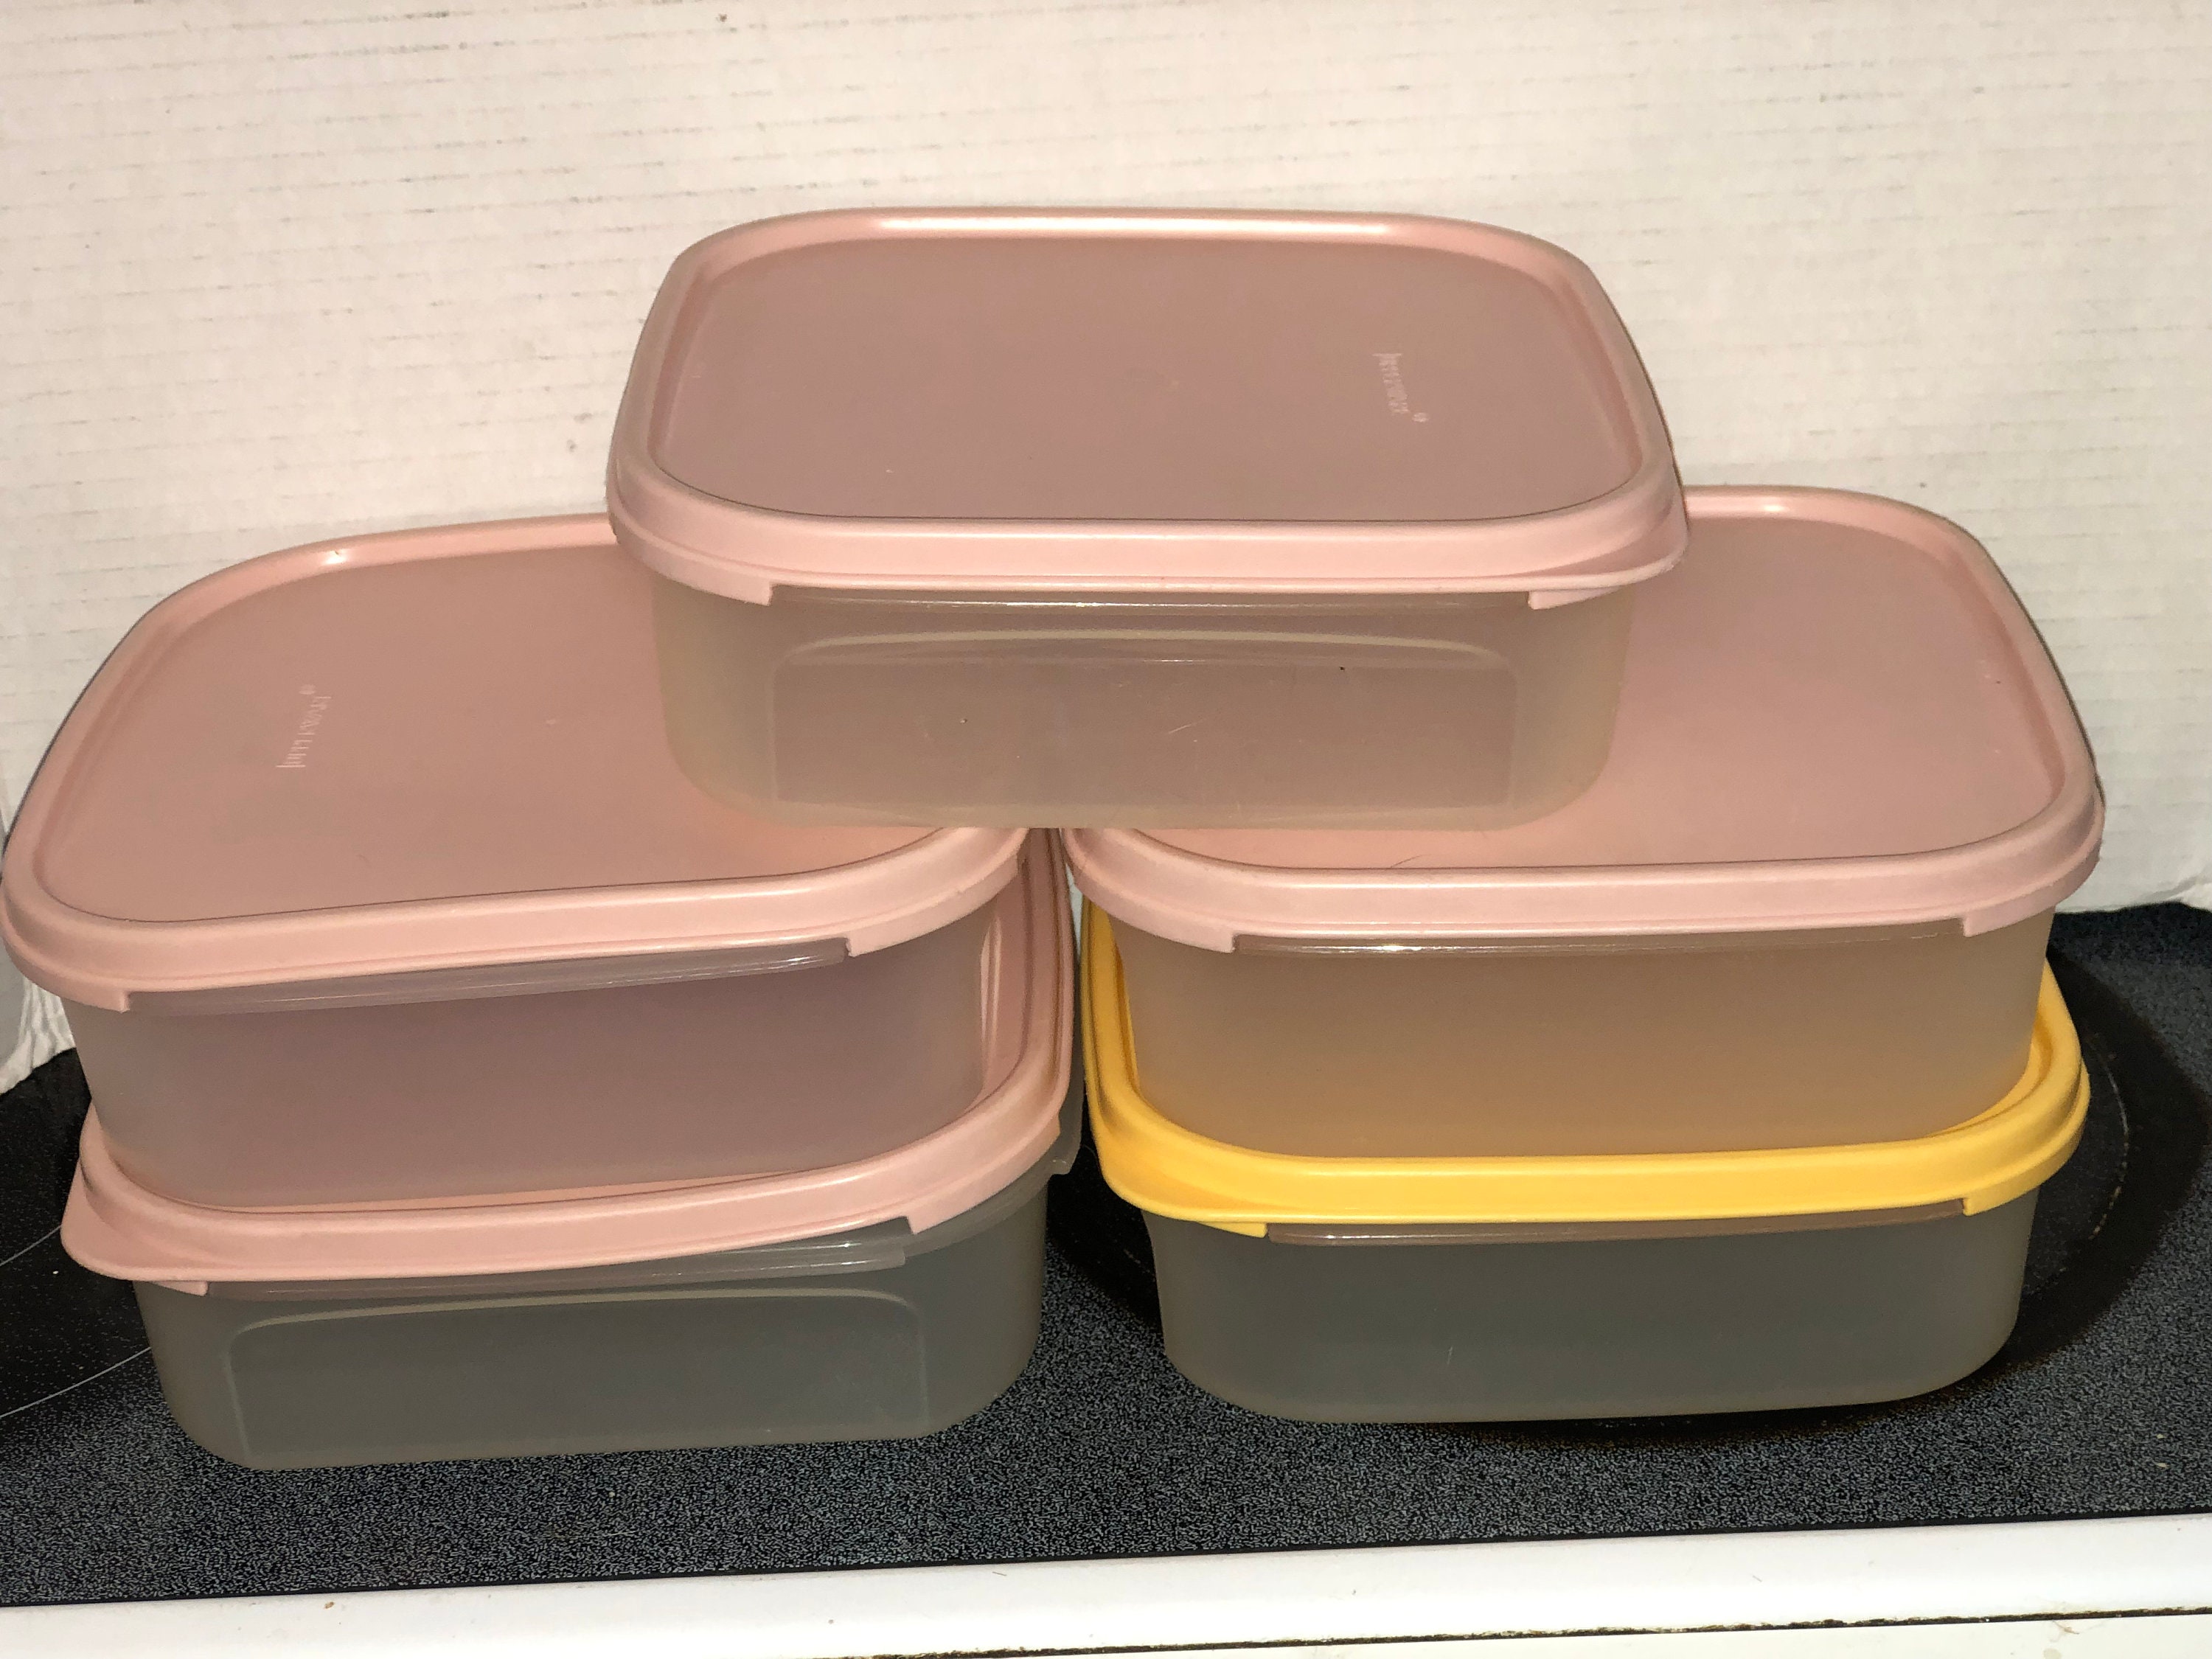 Tupperware food storage containers 10 piece set vintage | Etsy